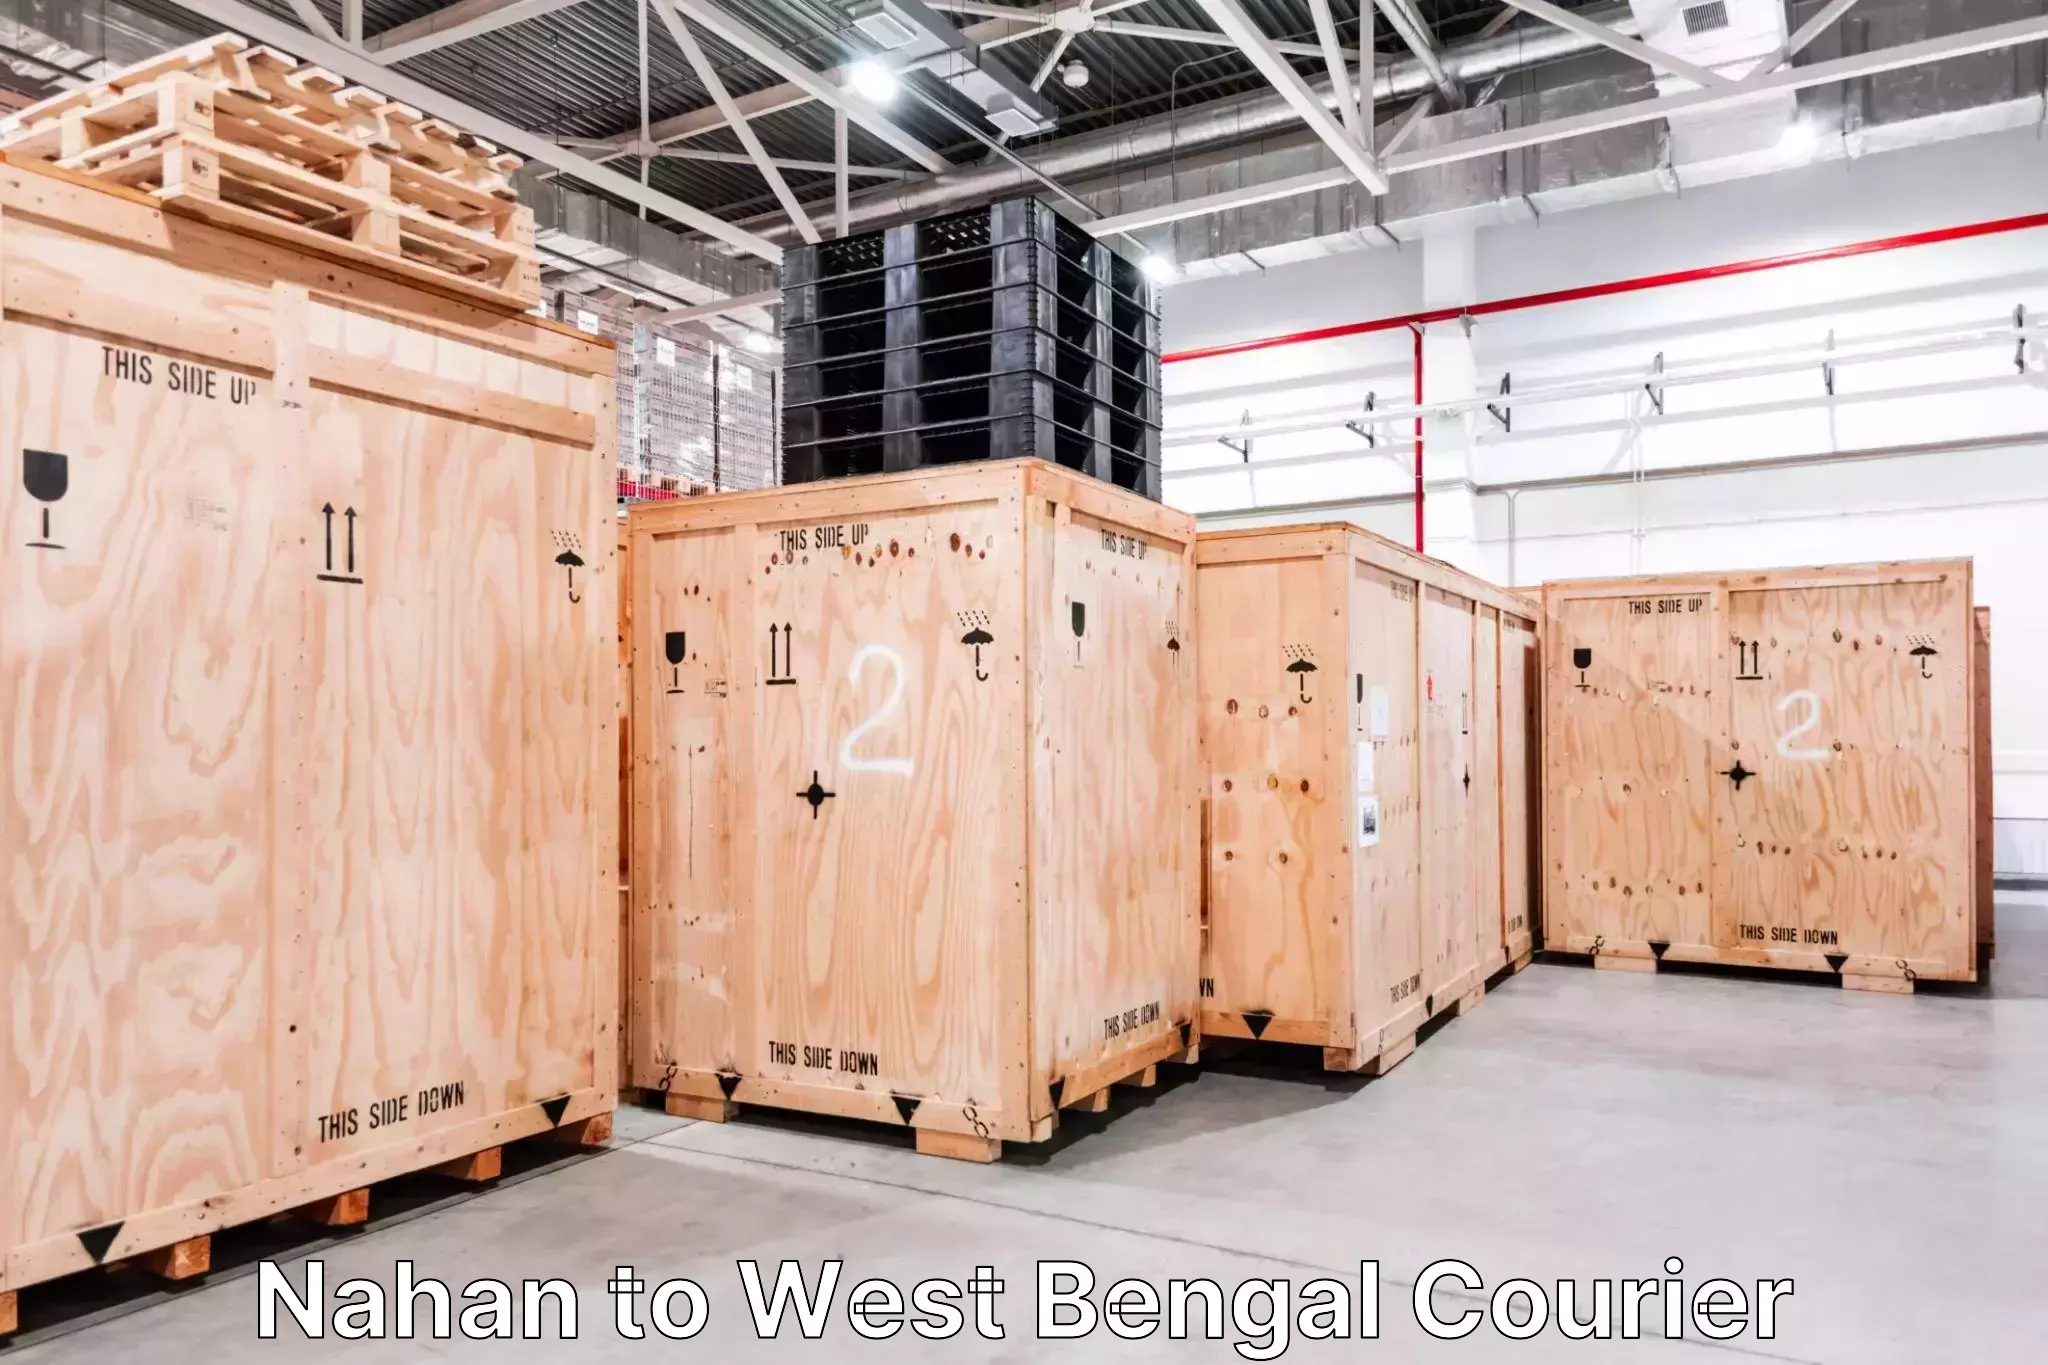 Luggage shipment specialists Nahan to West Bengal